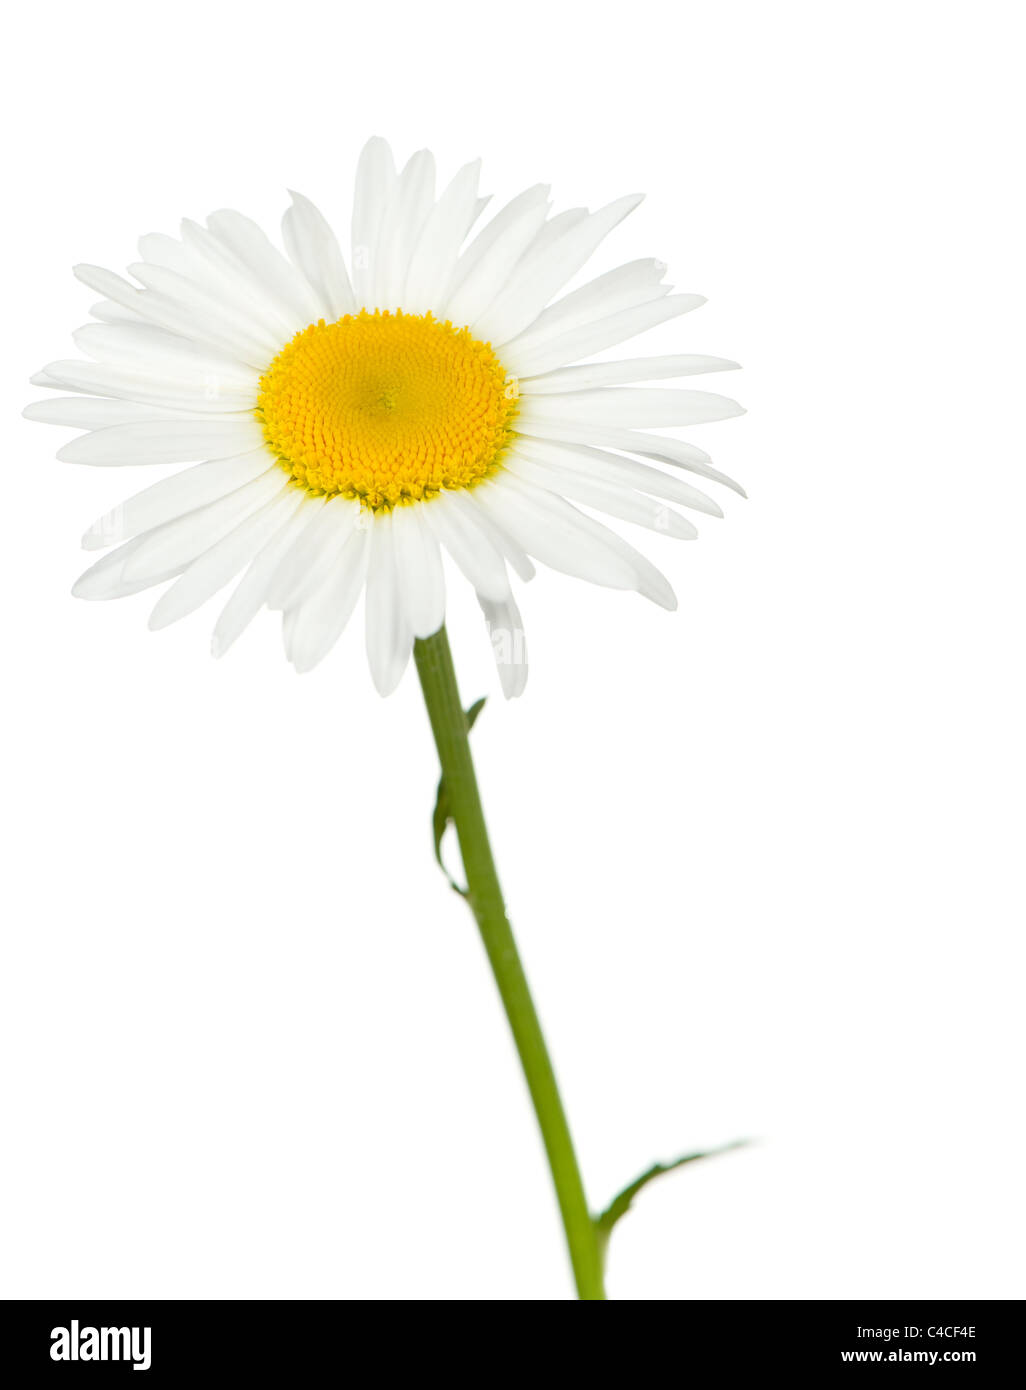 Camomile. It is isolated on a white background Stock Photo